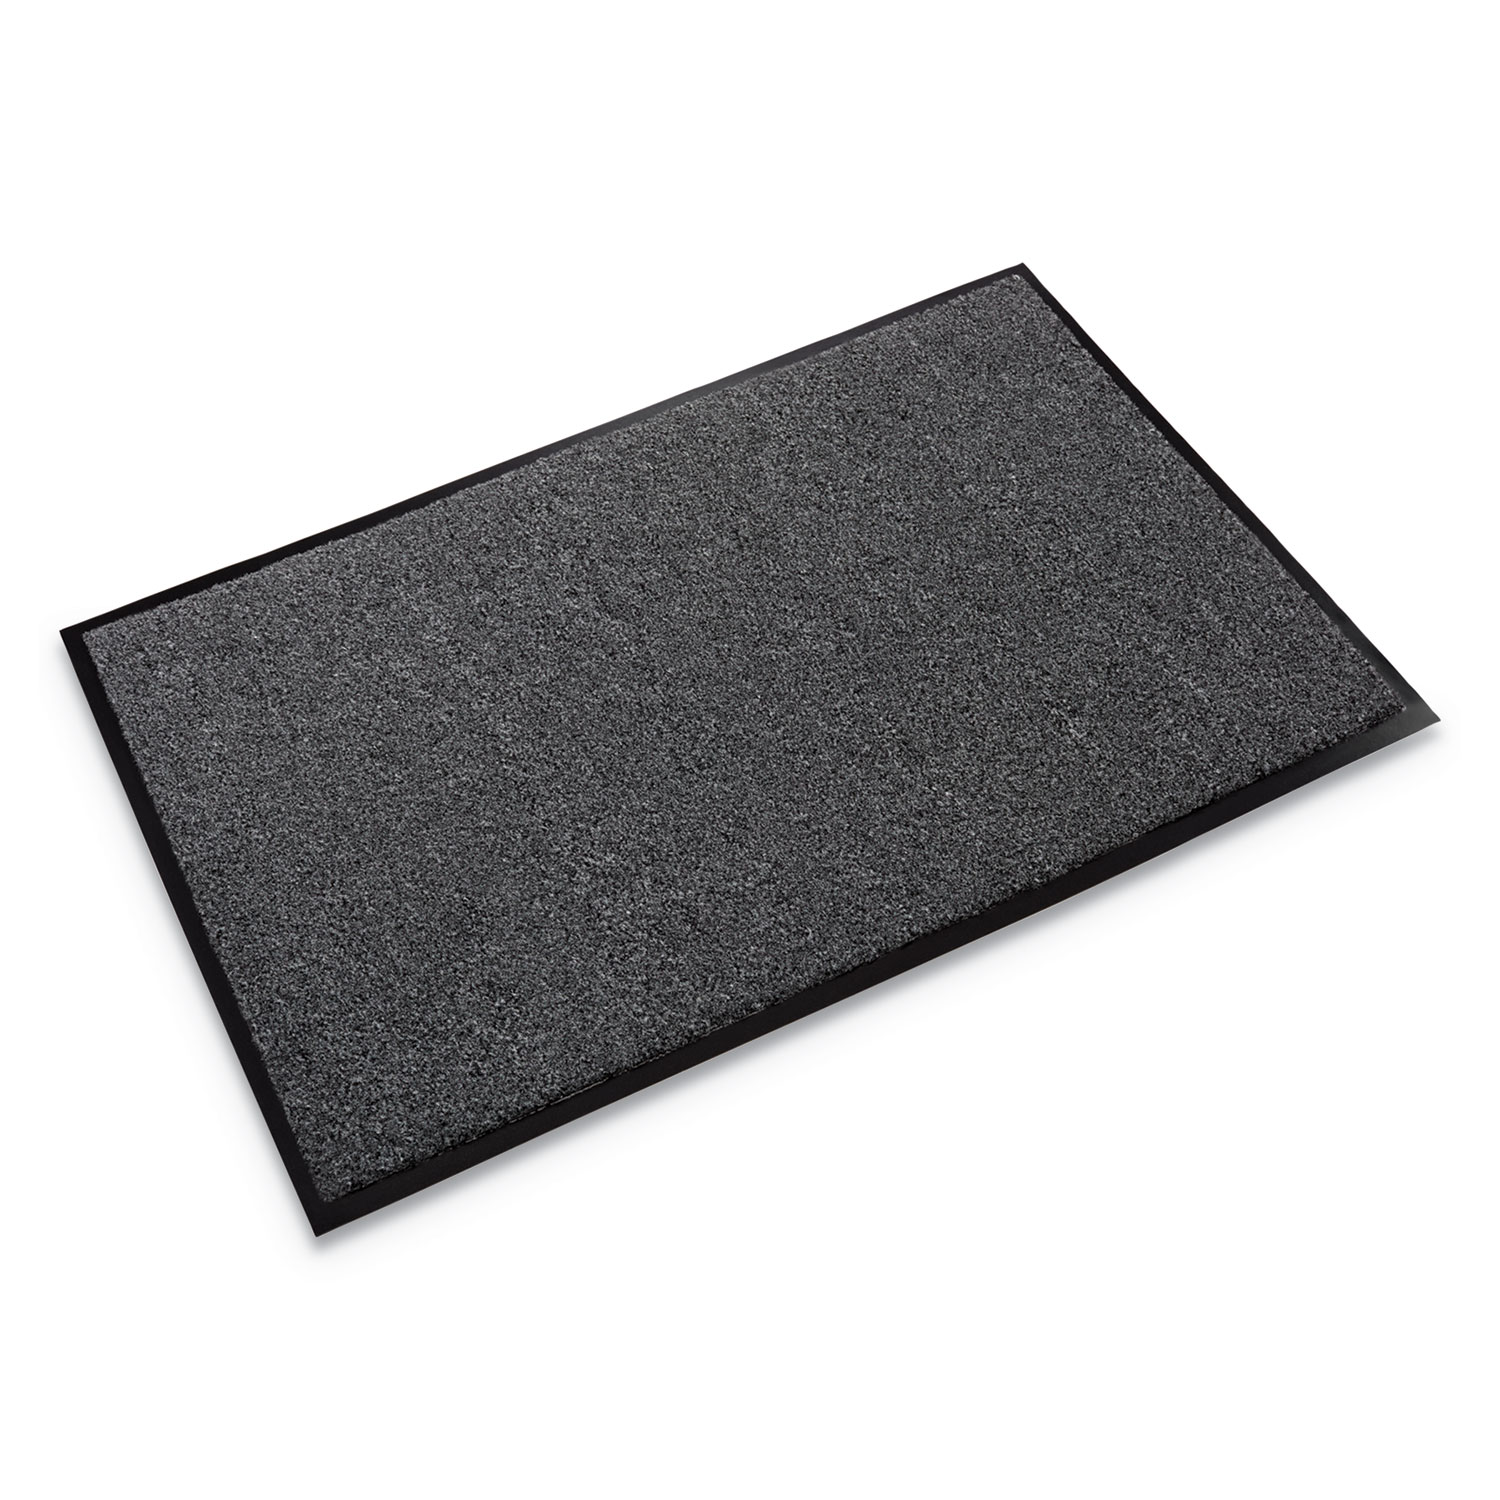  Crown GS 0034CH Rely-On Olefin Indoor Wiper Mat, 36 x 48, Charcoal (CWNGS0034CH) 